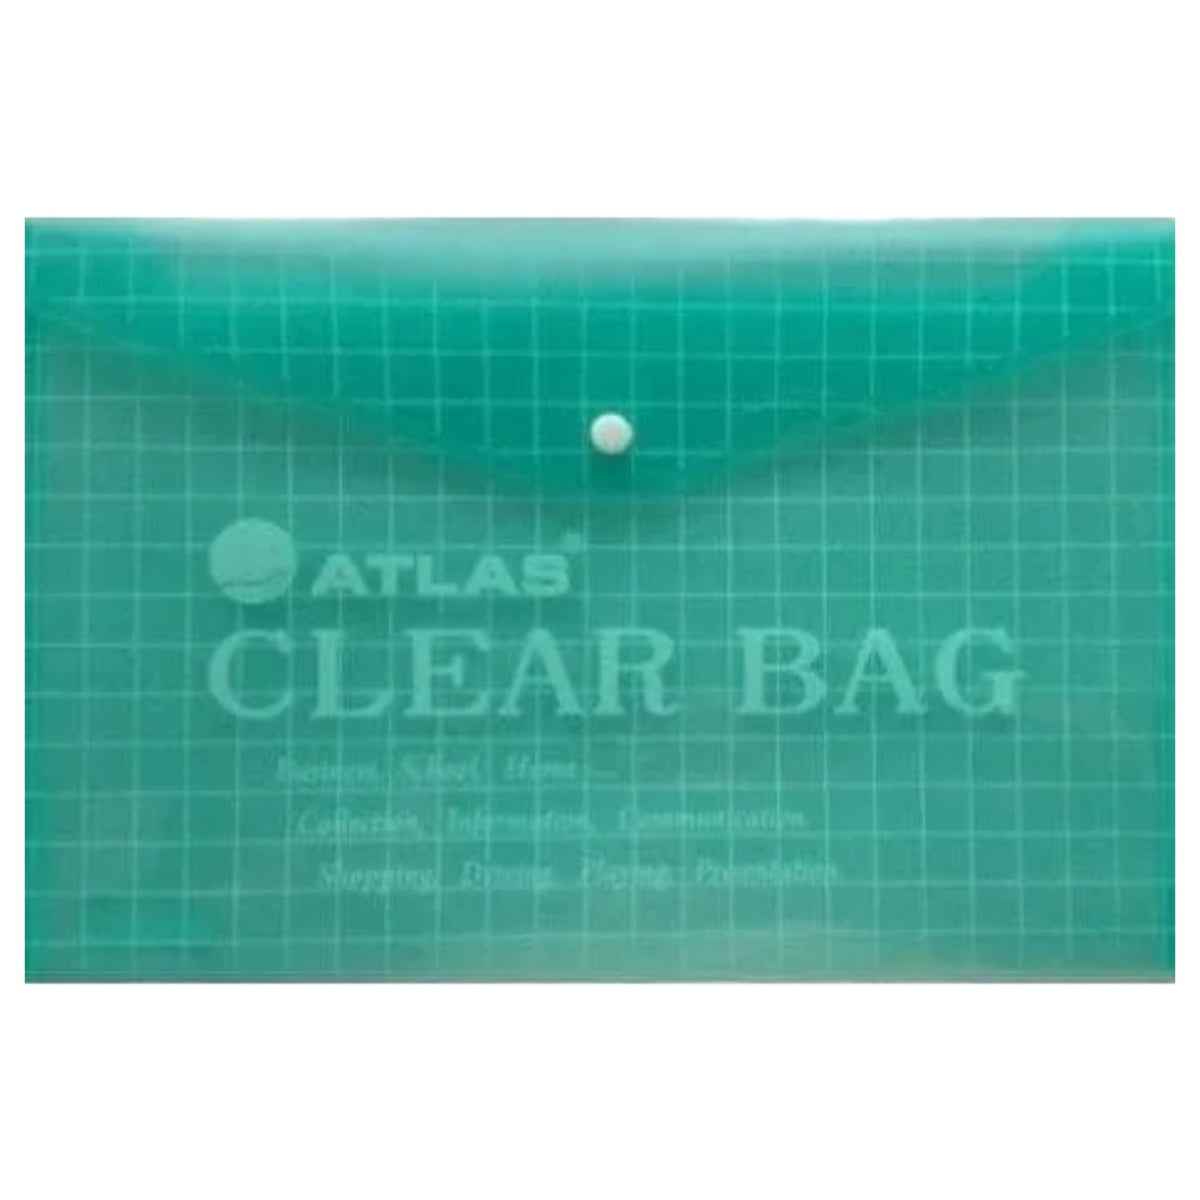 Atlas Document Bag "My Clear Bag" F/S, 12/pack, Green